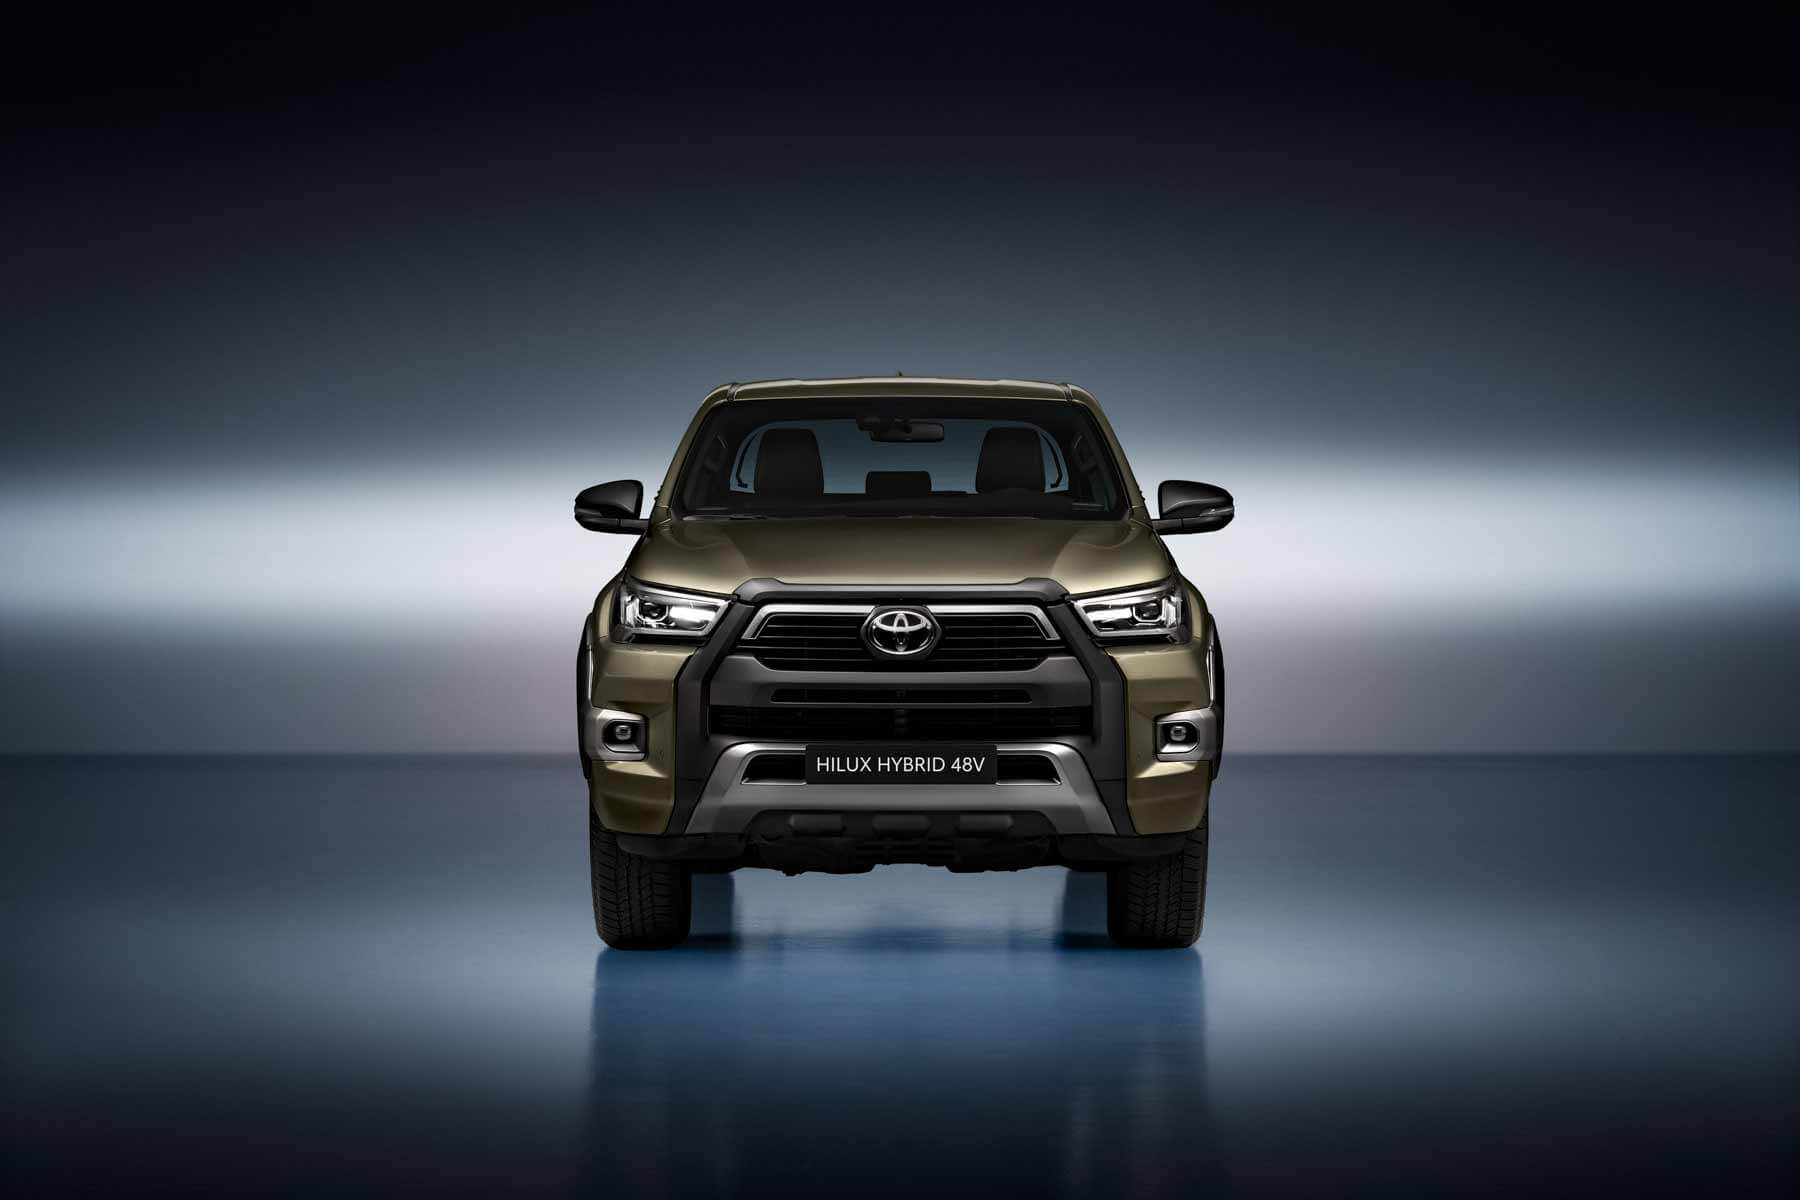 Toyota has declassified the characteristics of the Hilux hybrid pickup truck